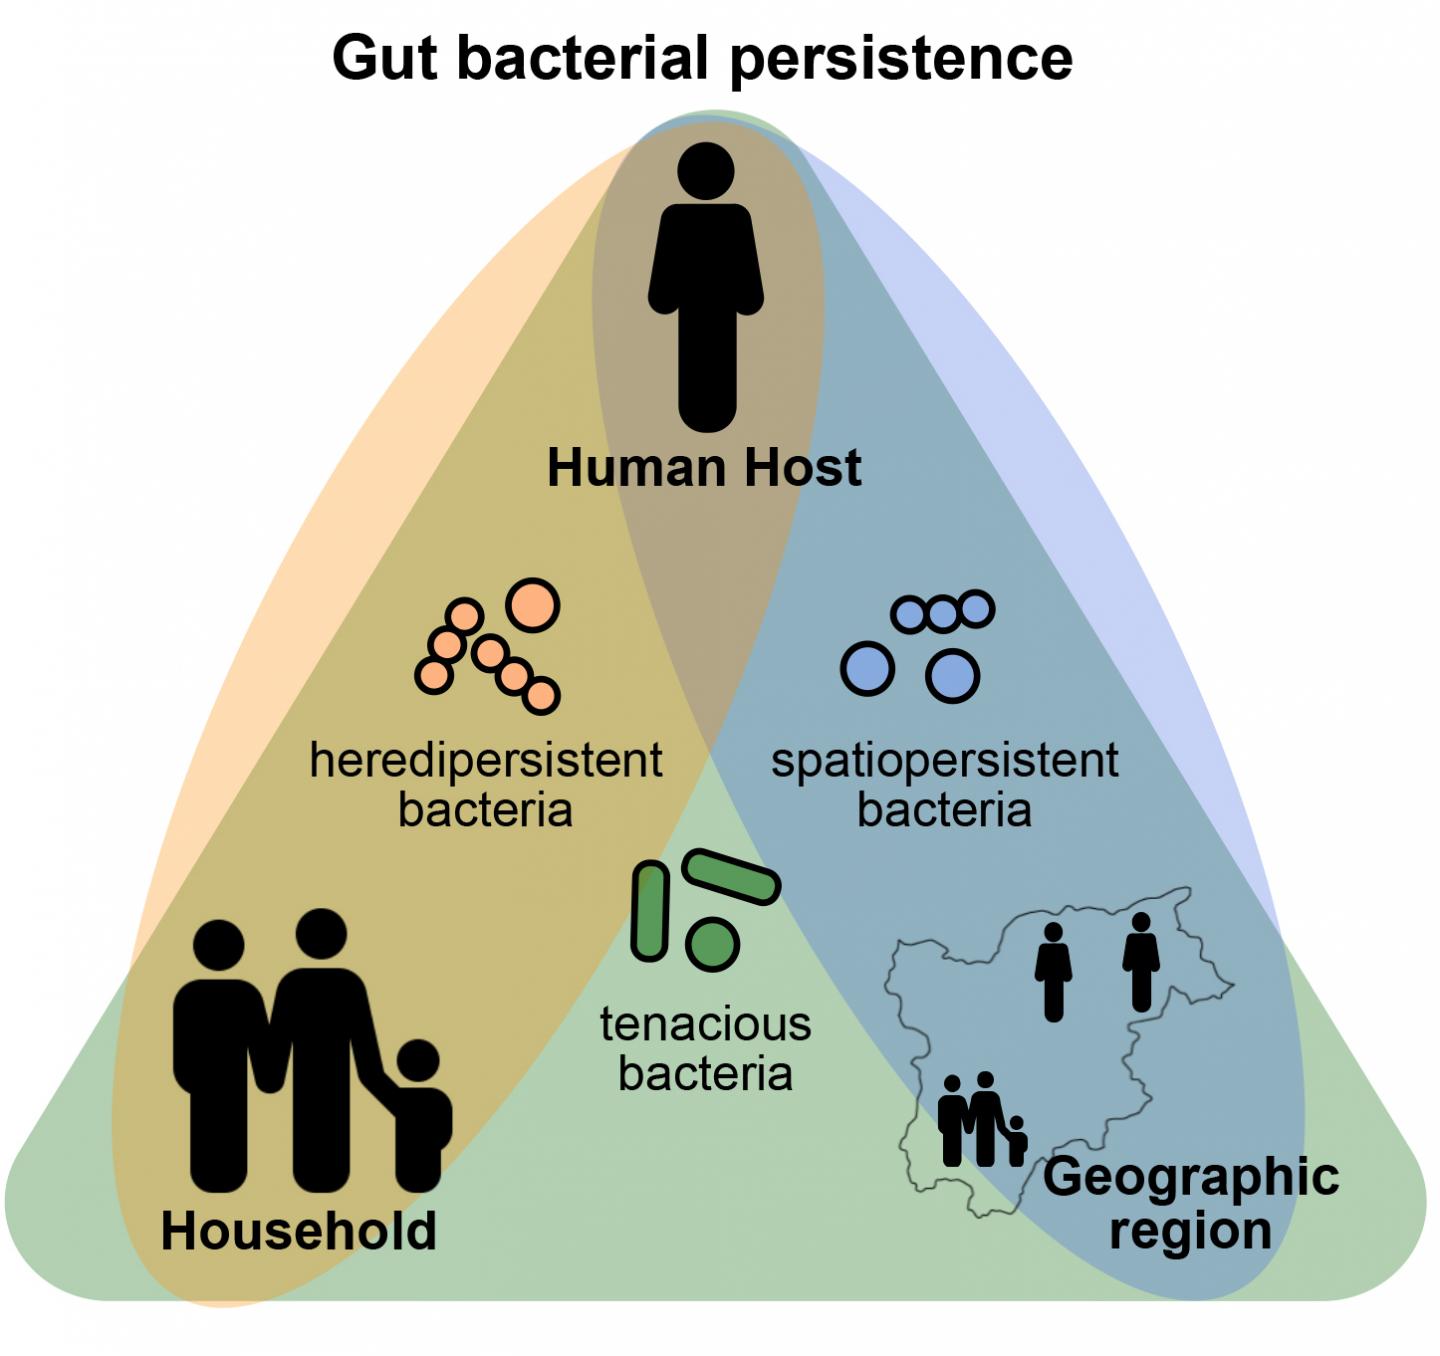 Persistence Pays off in the Human Gut Microbiome